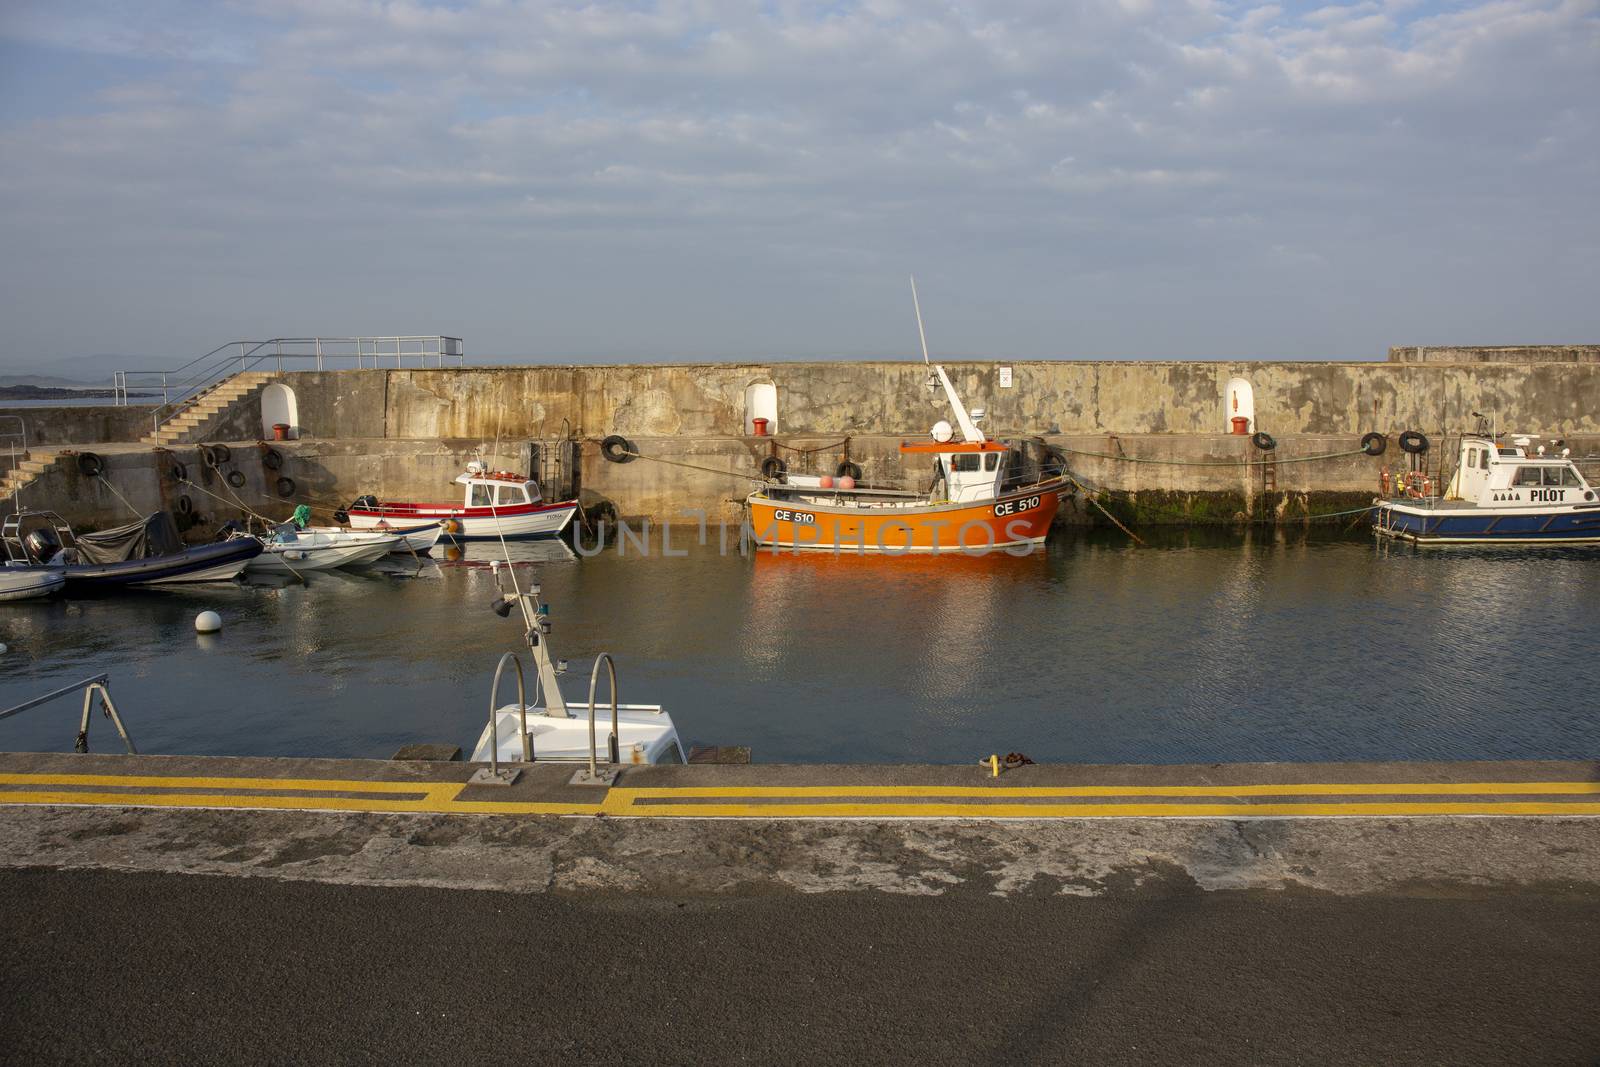 Old fishing boats docked in a small coastal port, Ireland by Tjeerdkruse